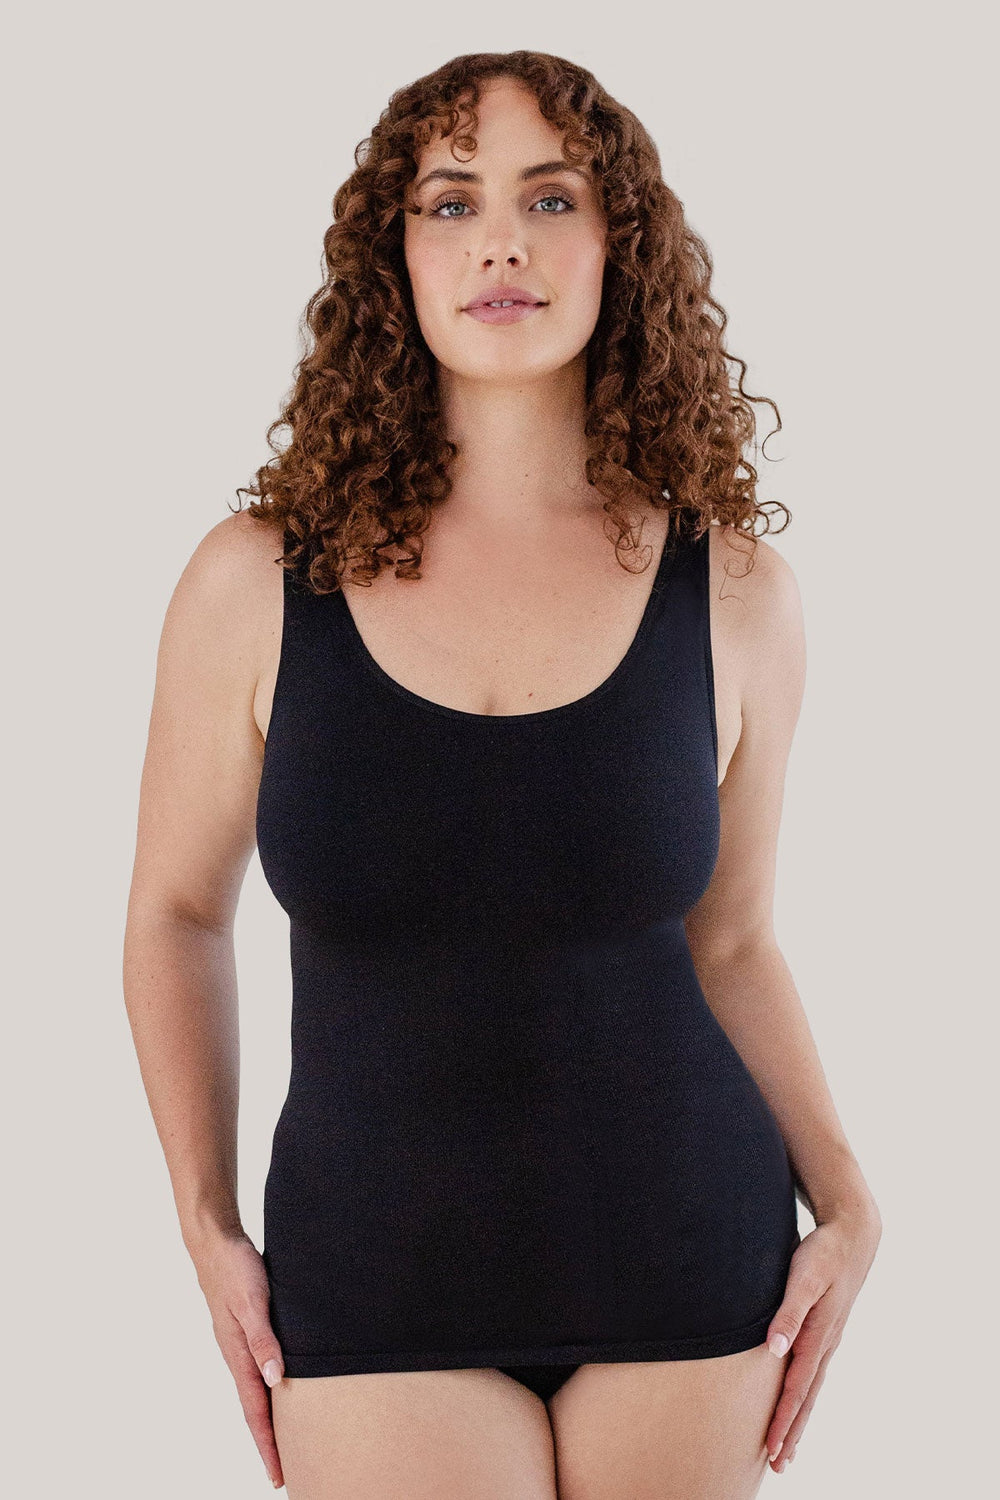 Women's comfortable Reversible Neckline, shaping and firming cami | Camyz Shapewear Smoothing Tank I Bella Bodies Australia I Black | Front